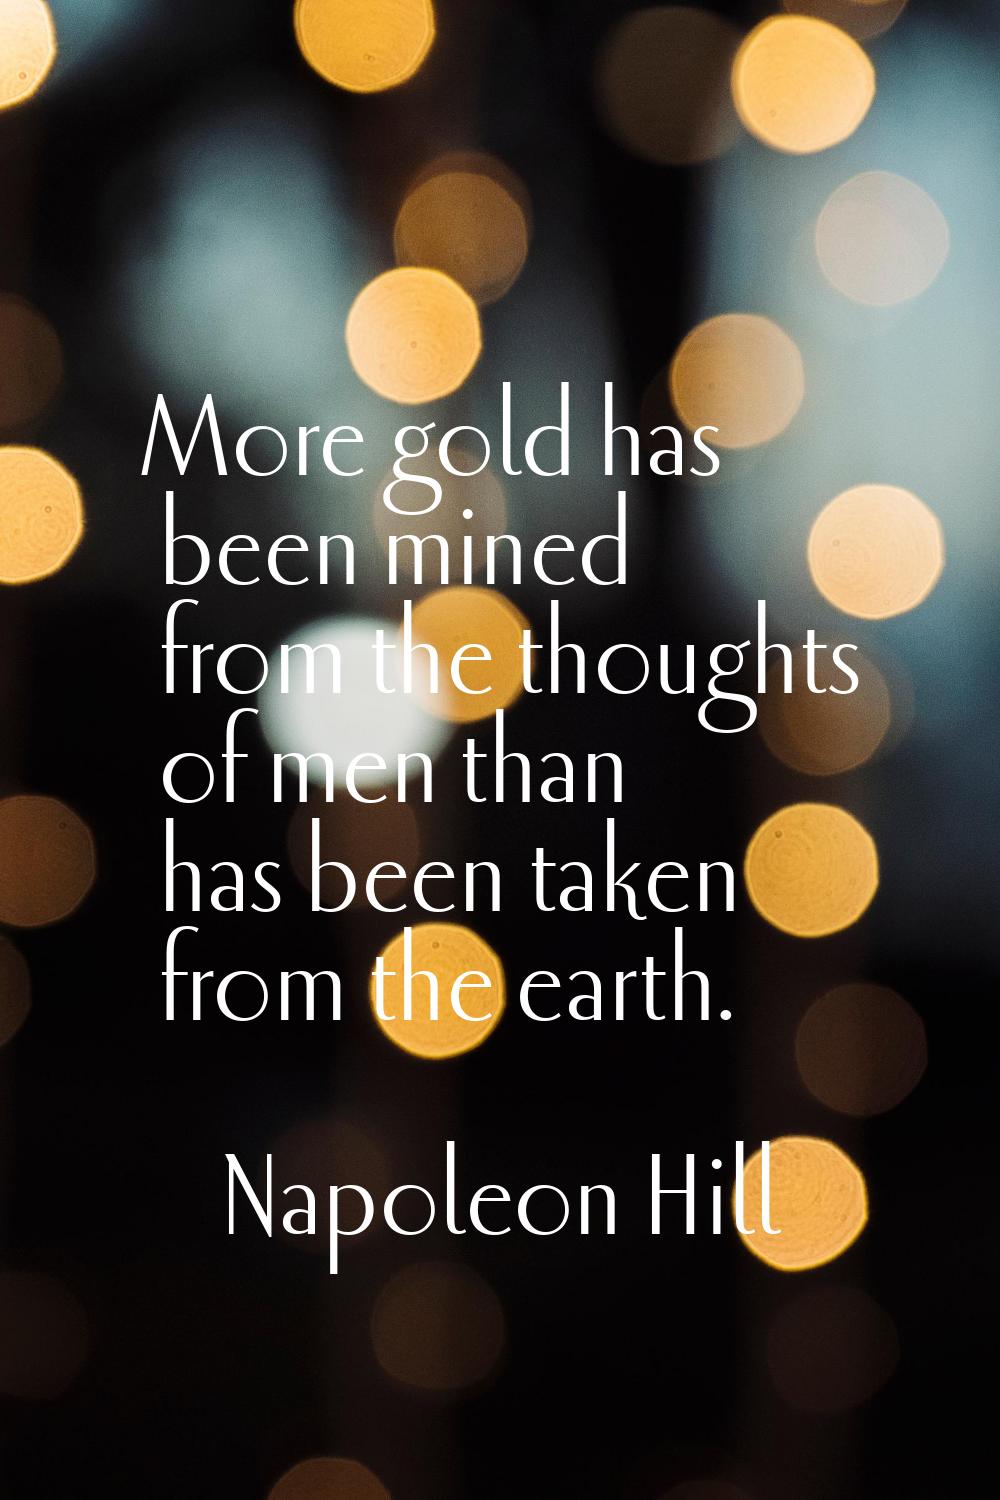 More gold has been mined from the thoughts of men than has been taken from the earth.